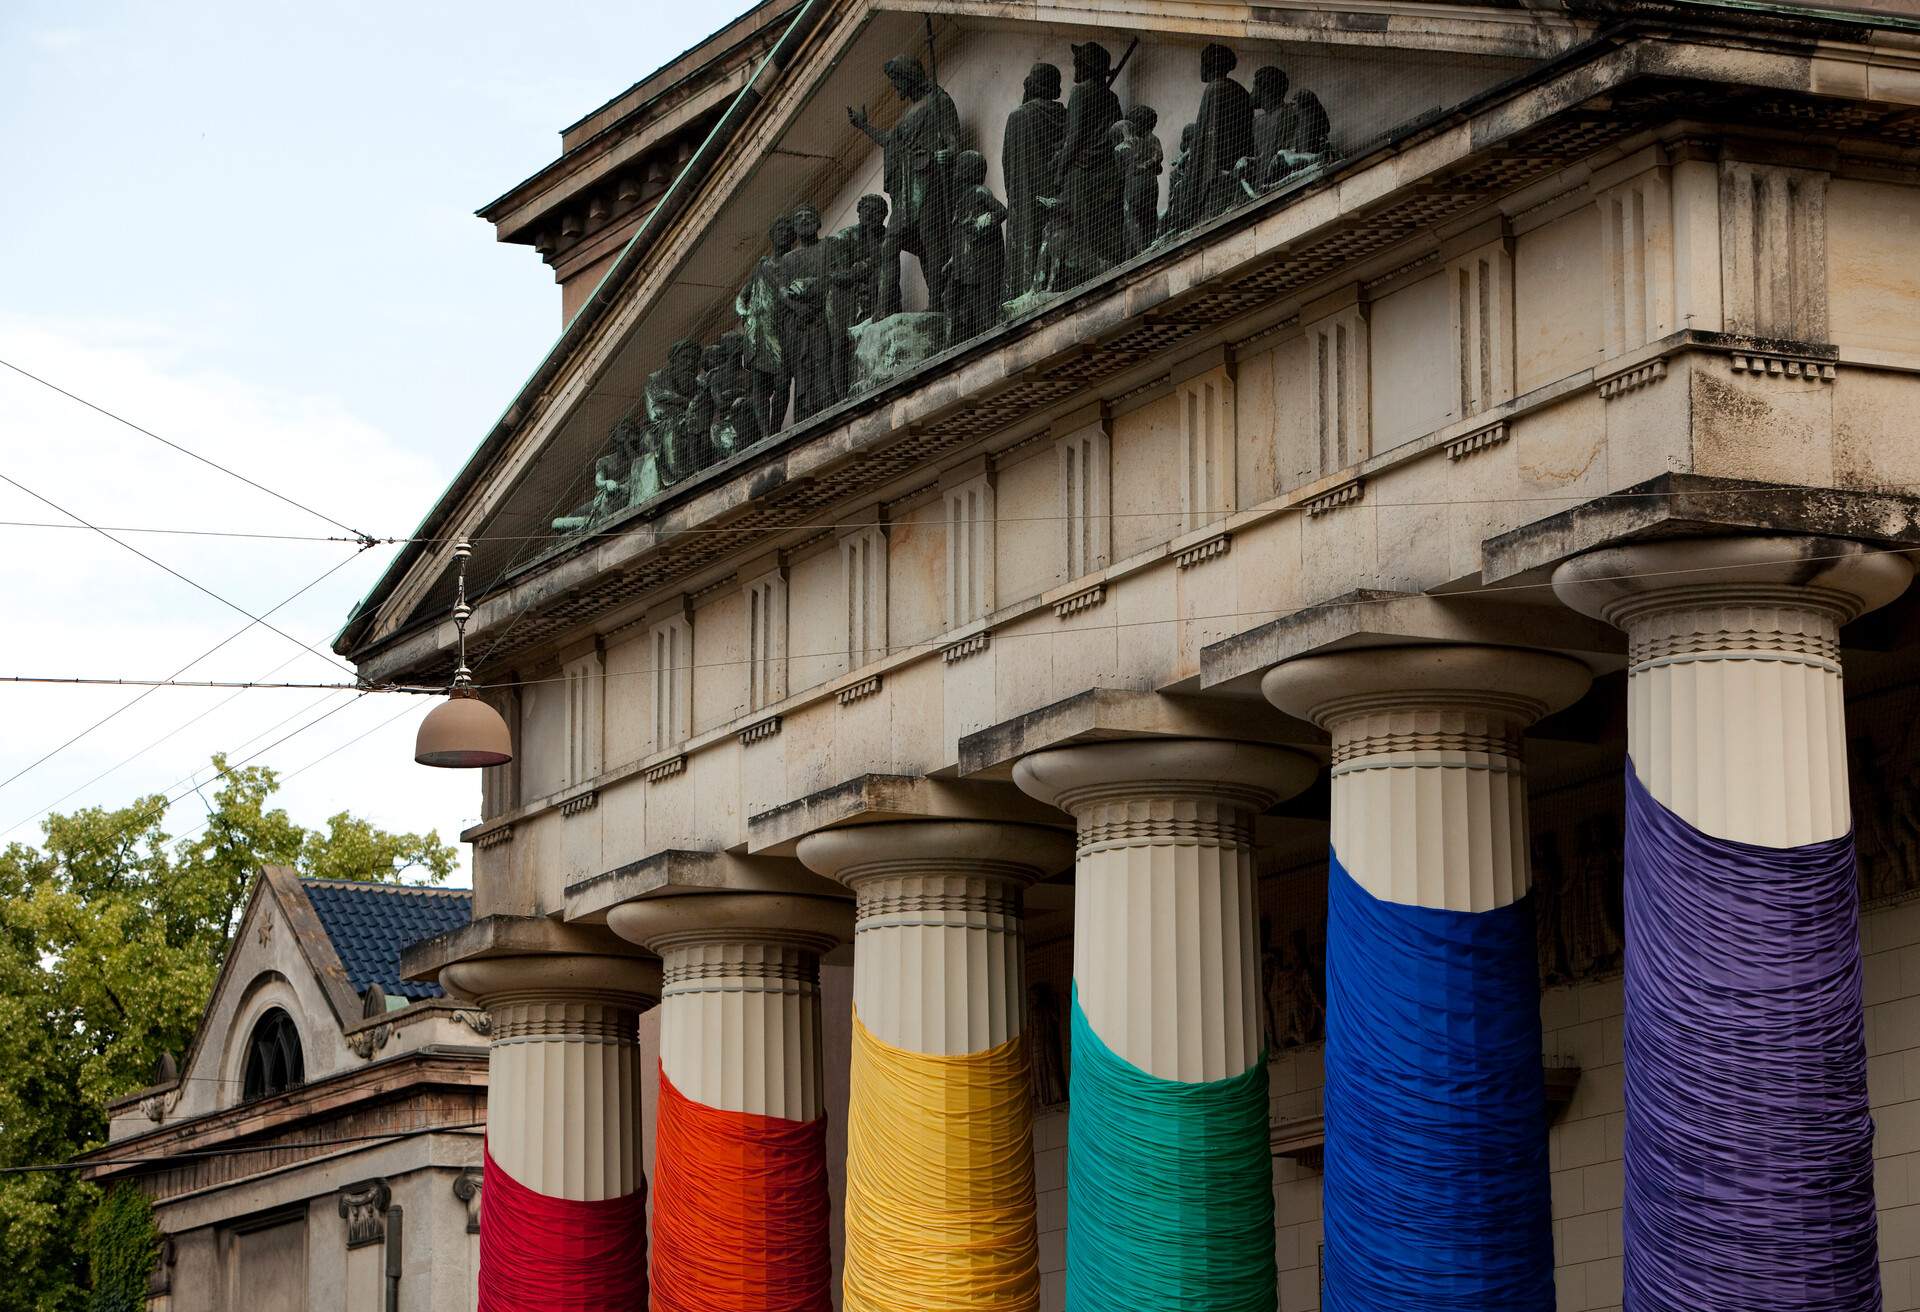 Pillars of Our Lady Church wrapped in fabric in the Gay colors